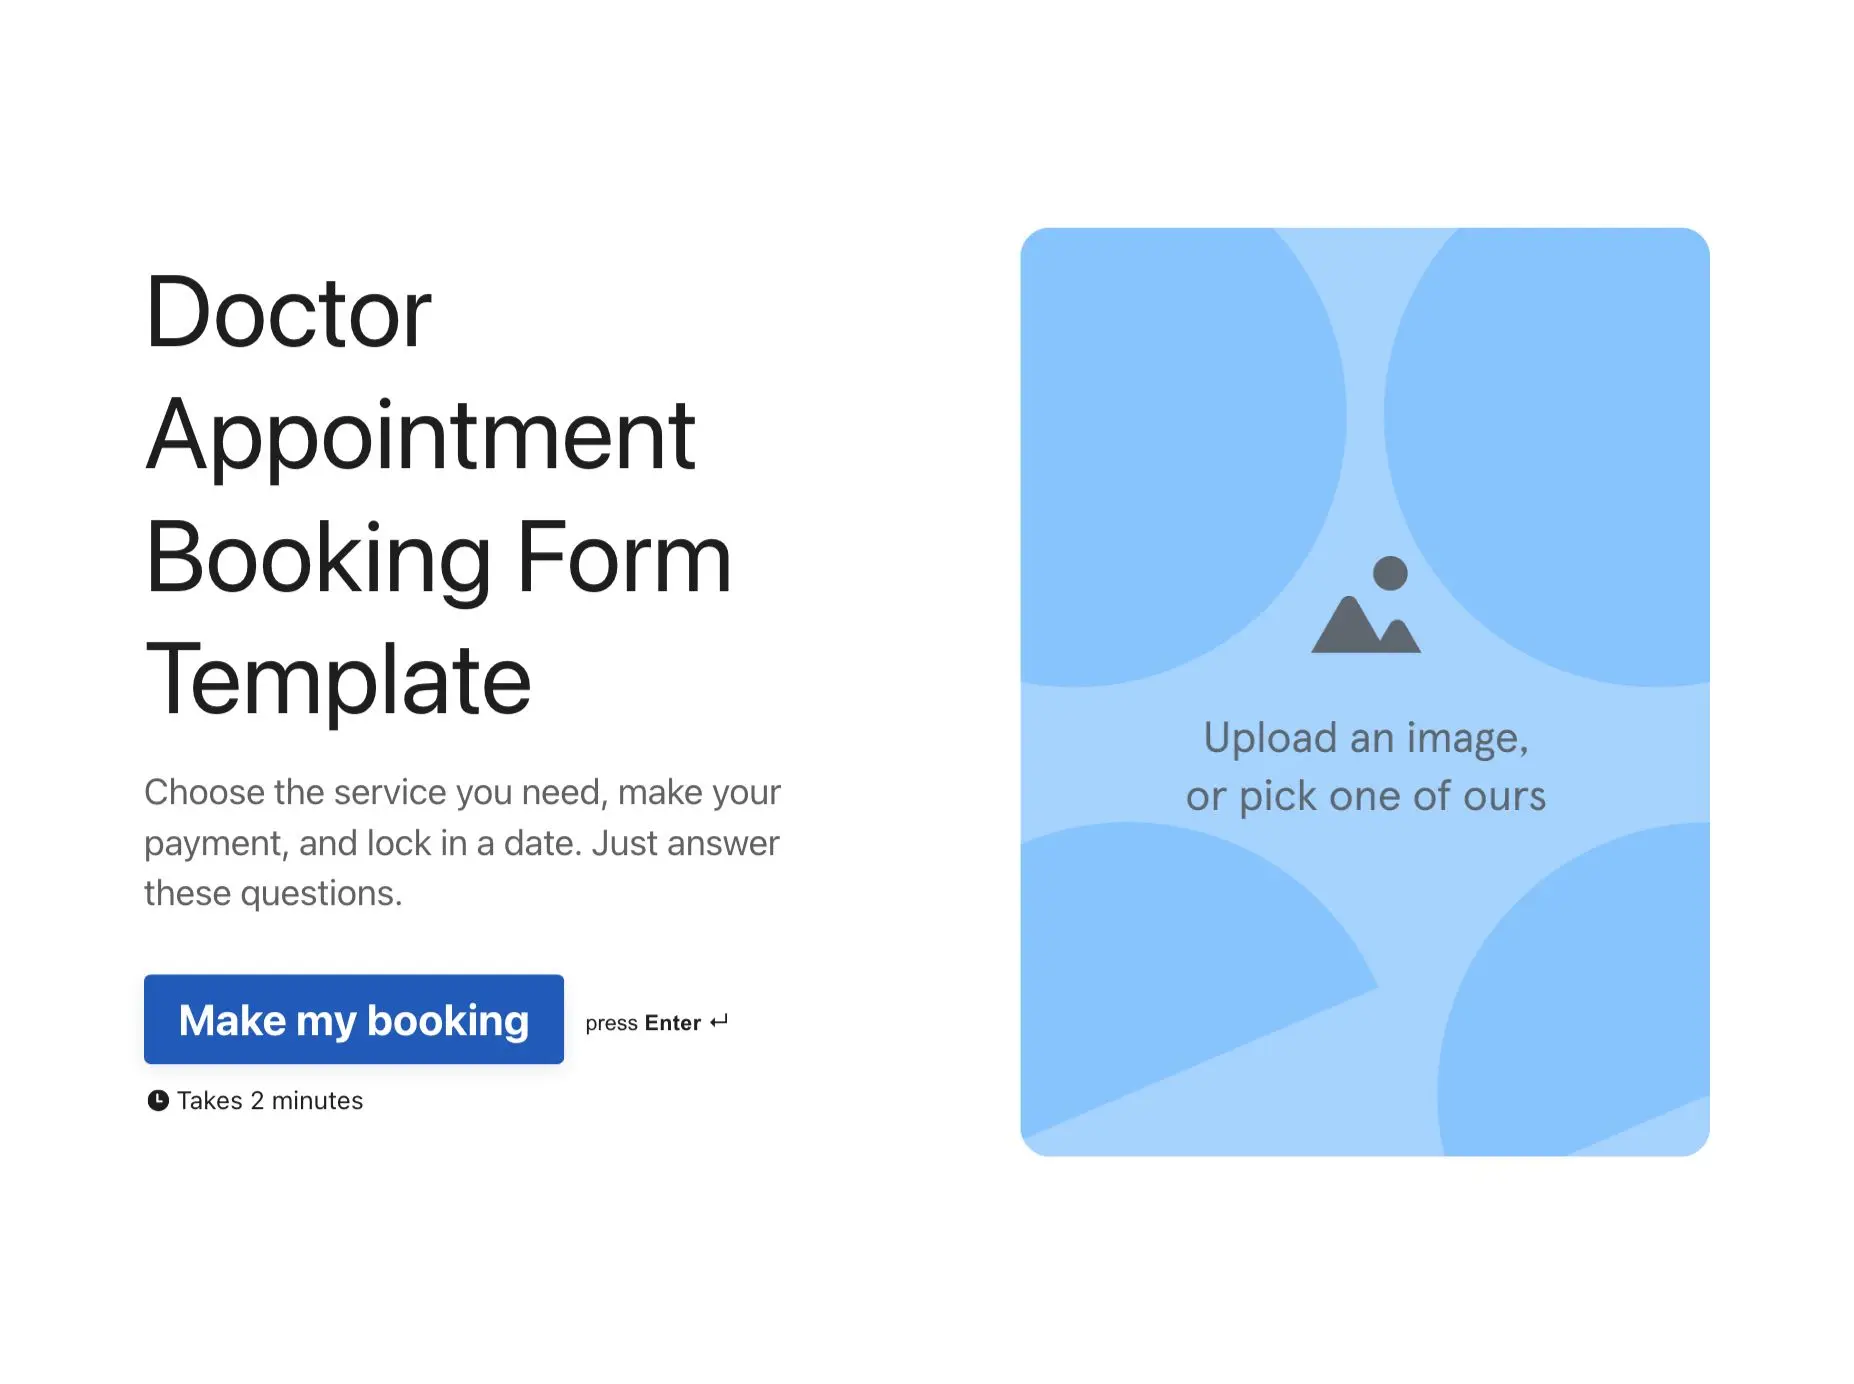 Doctor Appointment Booking Form Template Hero